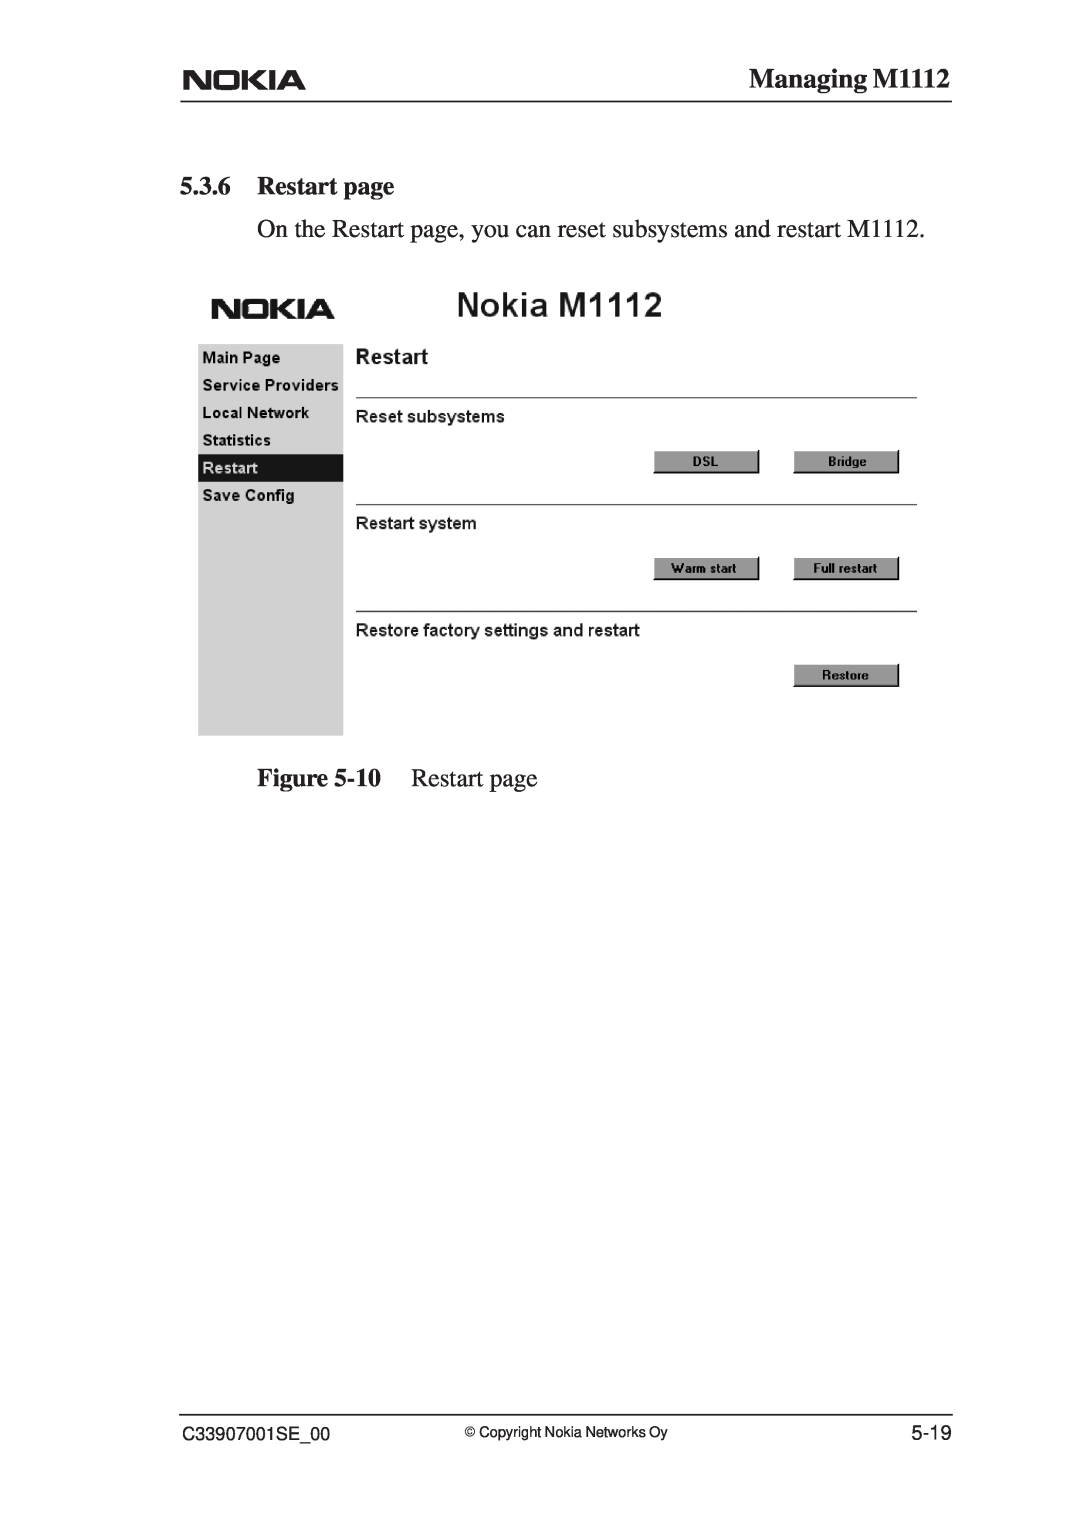 Nokia manual Managing M1112, On the Restart page, you can reset subsystems and restart M1112, 10 Restart page, 5-19 